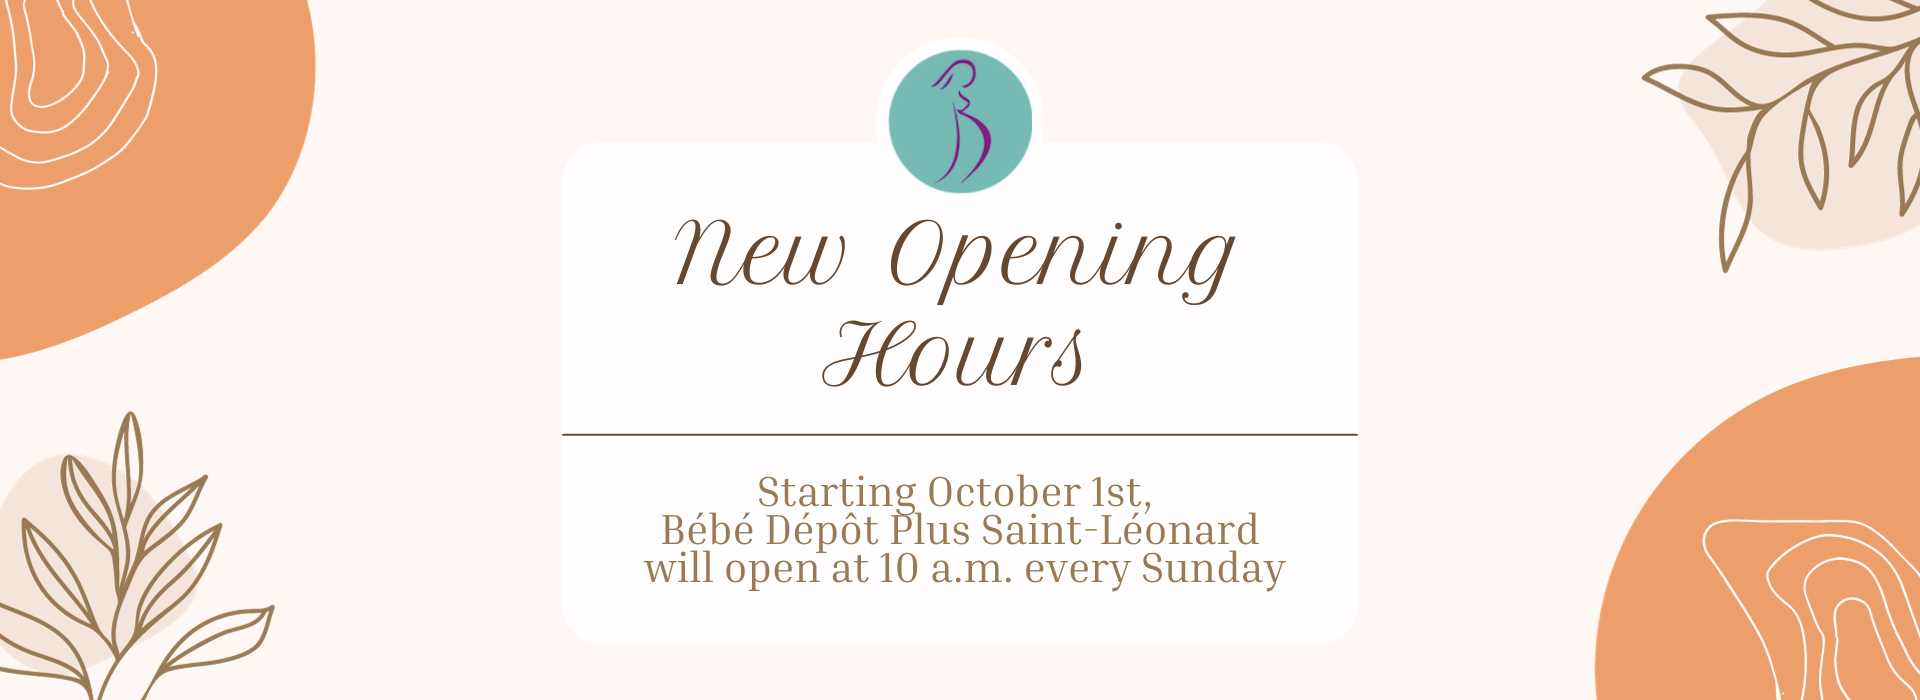 NEW OPENING HOURS